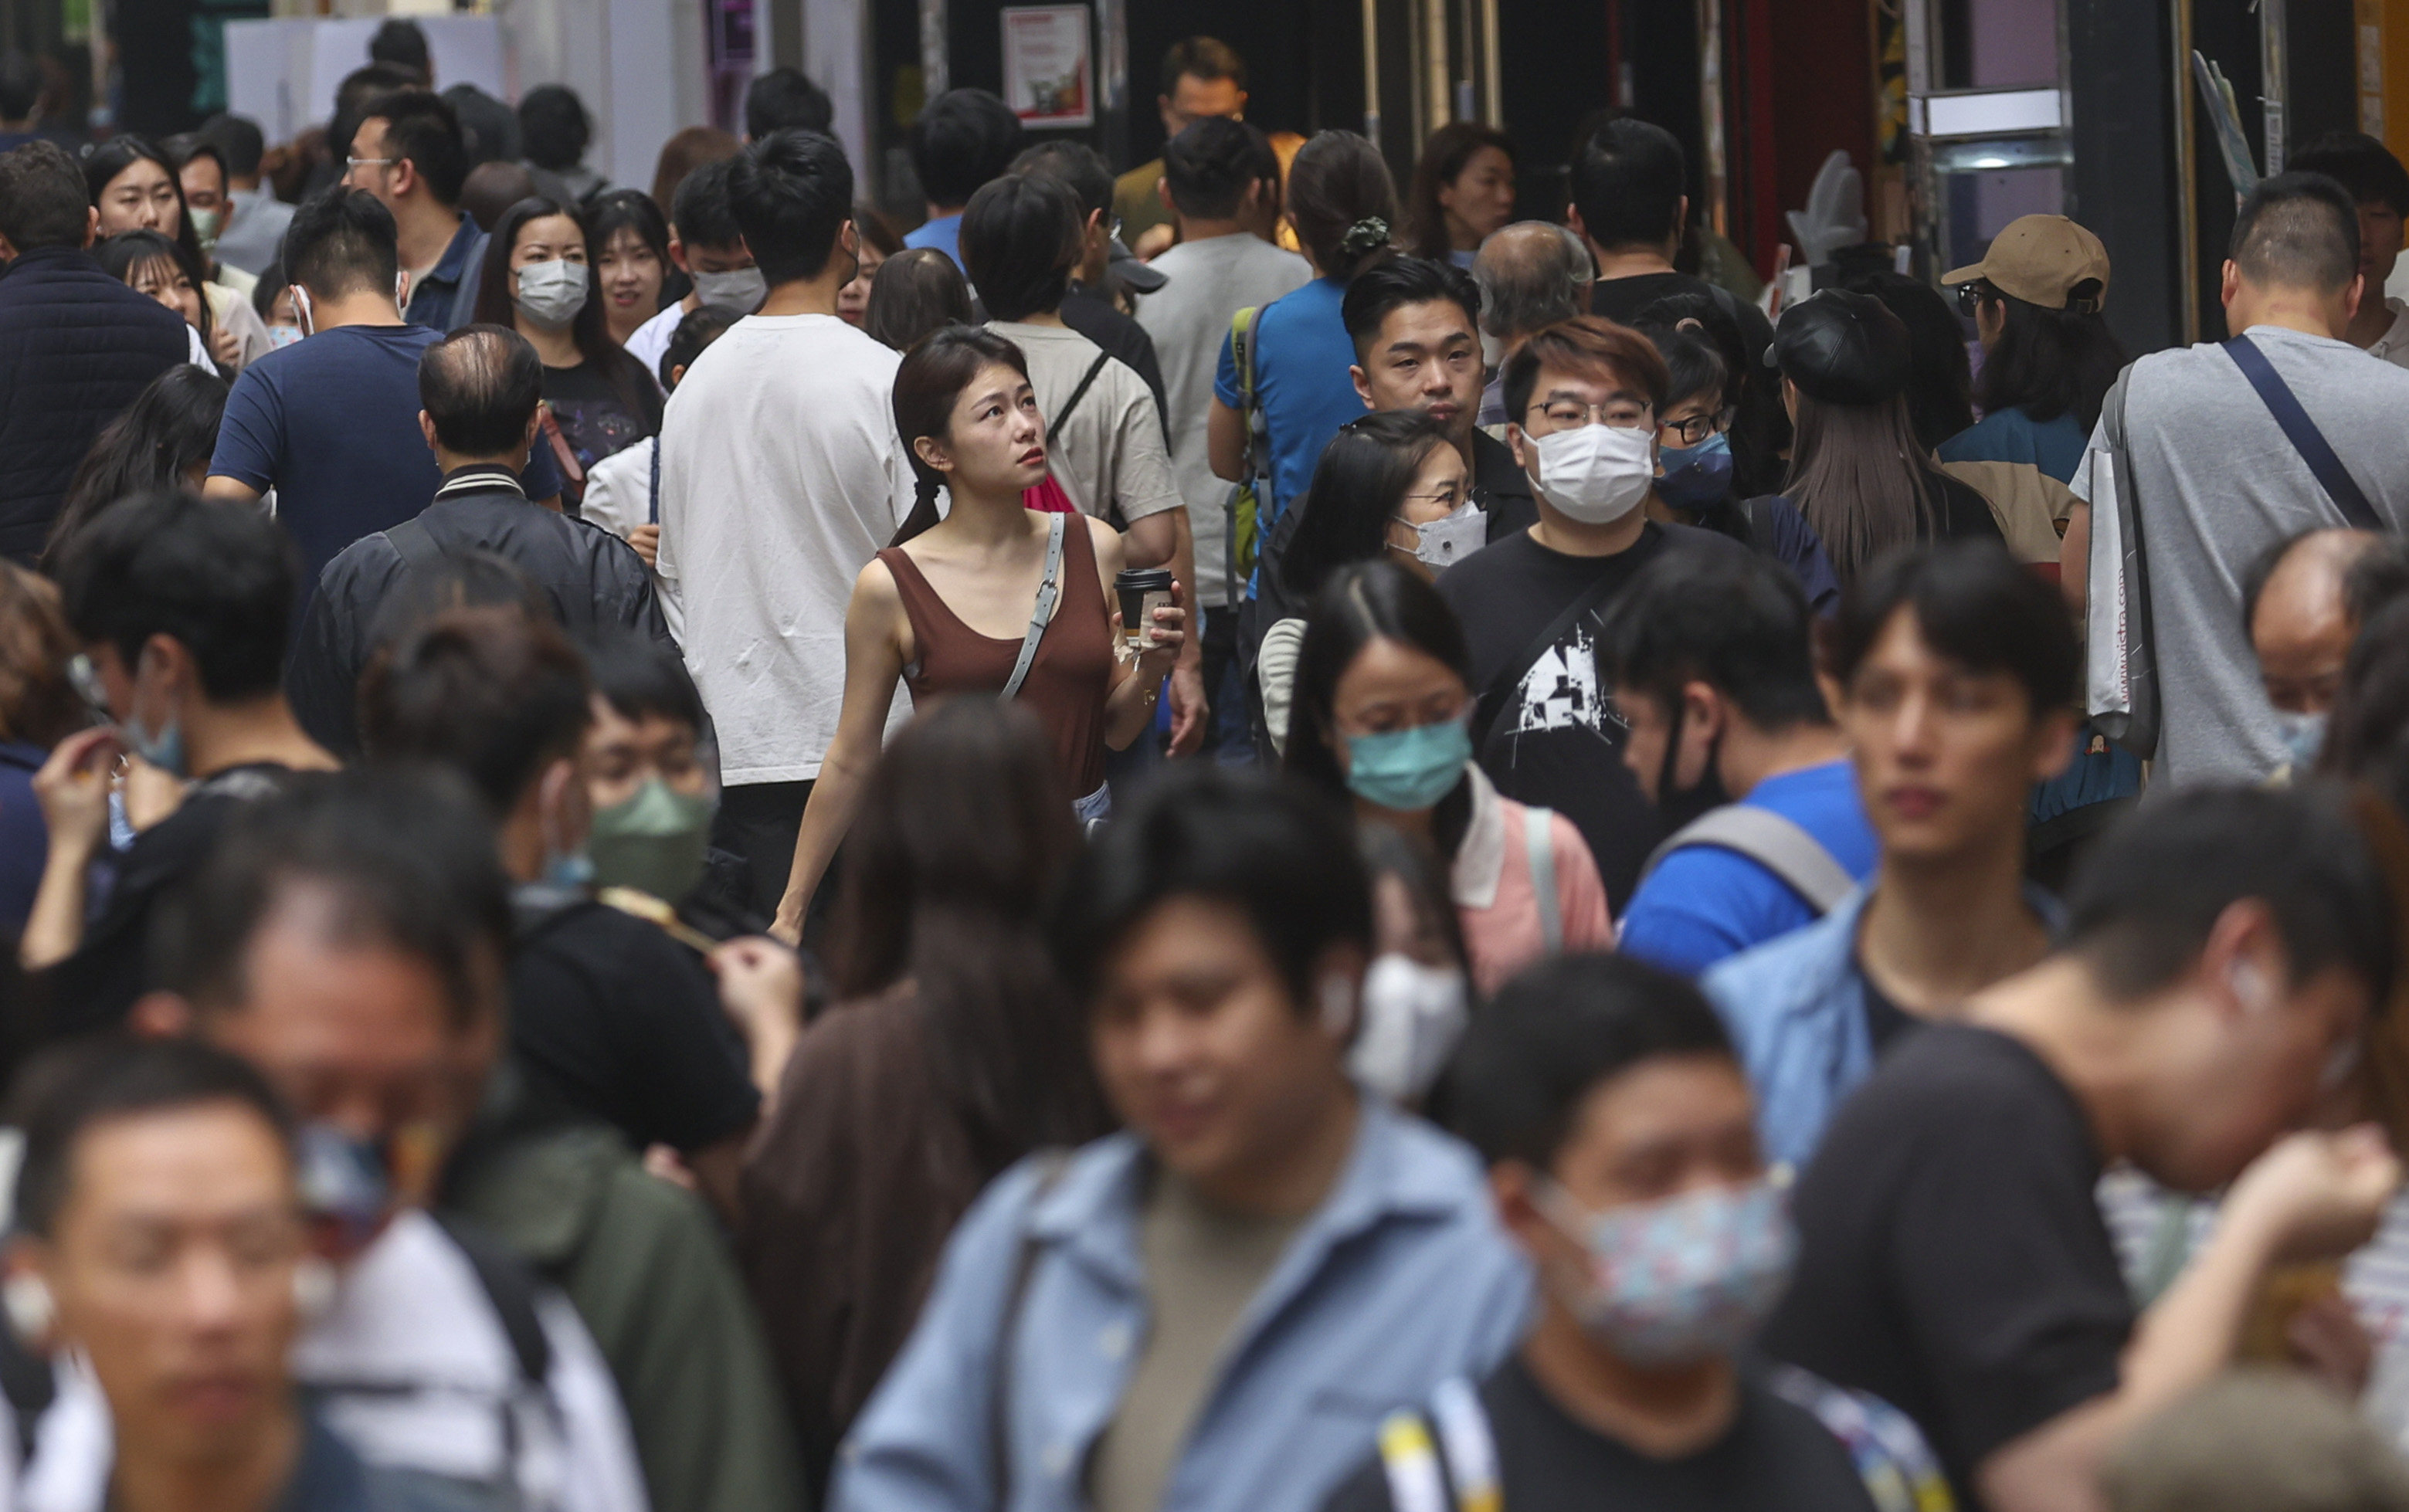 Covid-19 and flu cases have been on the rise in Hong Kong. Photo: Yik Yeung-man